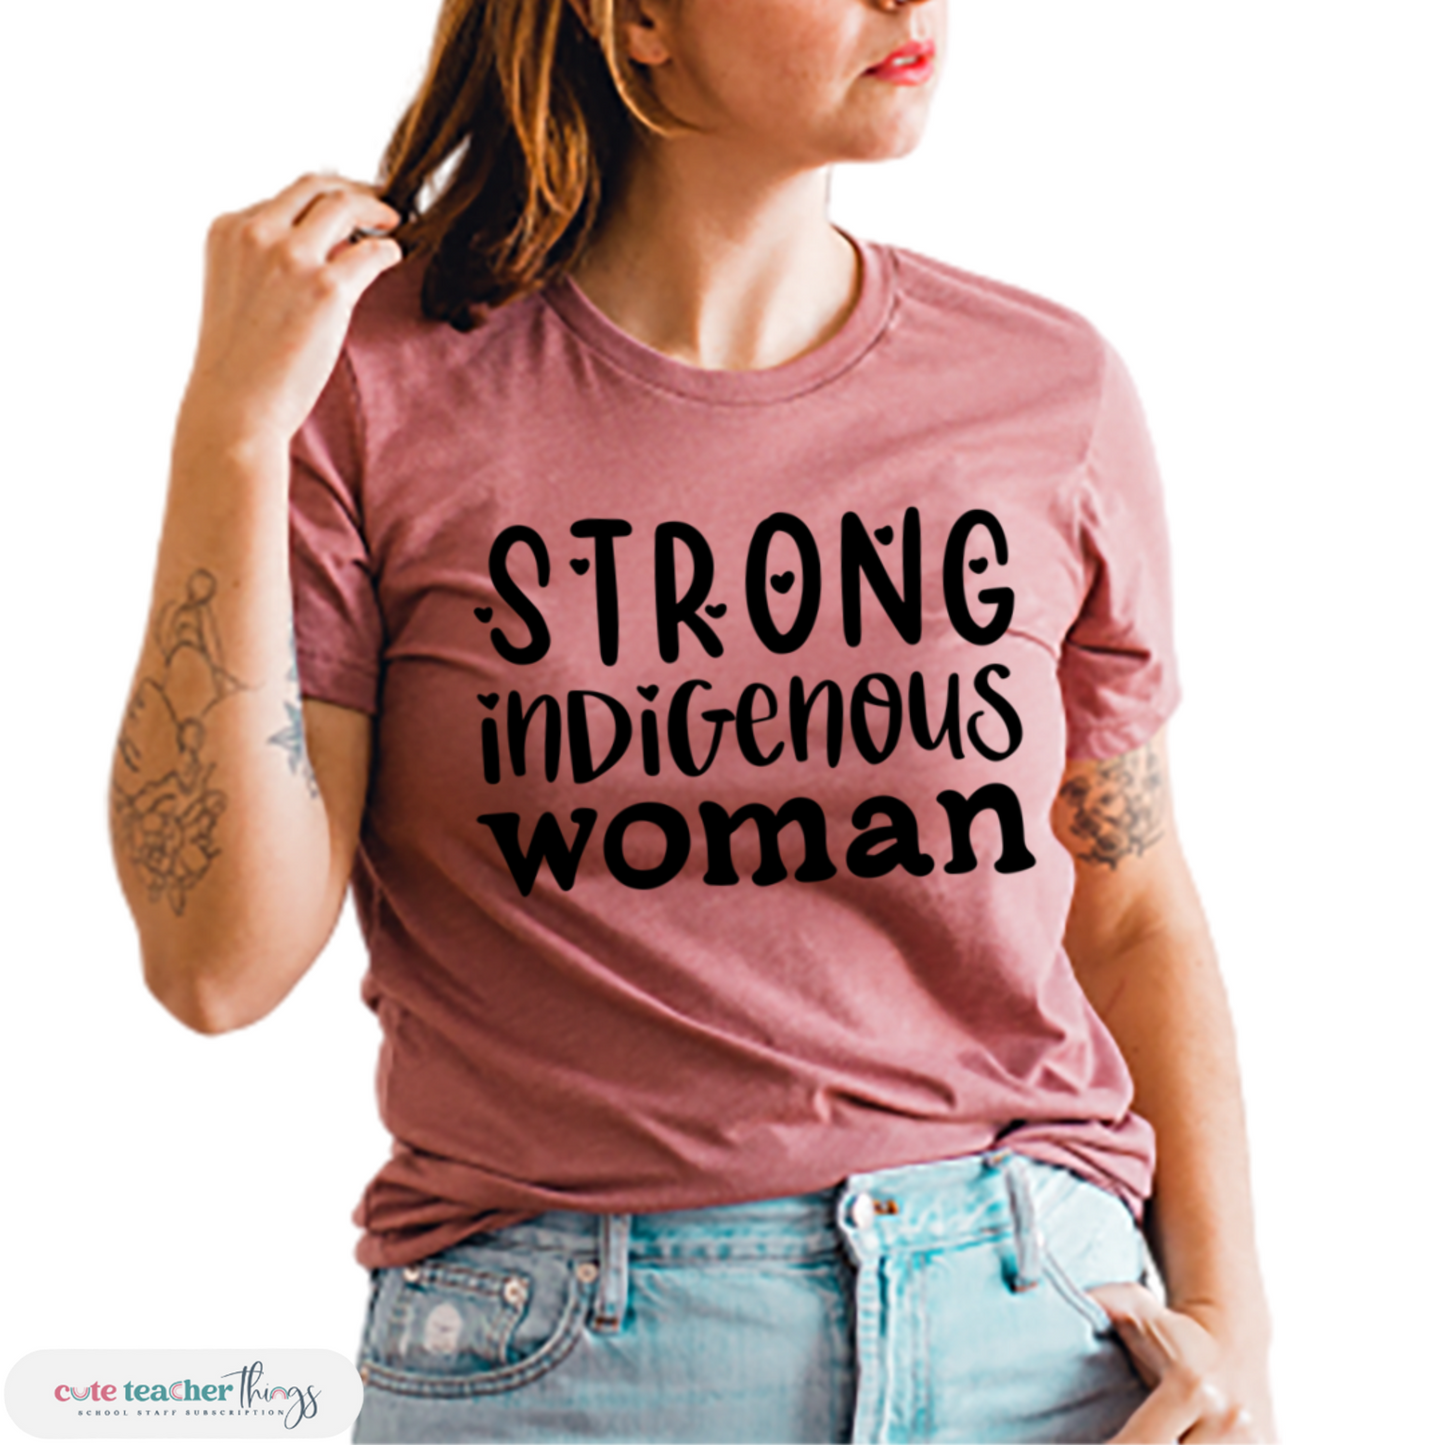 strong indigenous woman design, native american heritage t-shirt